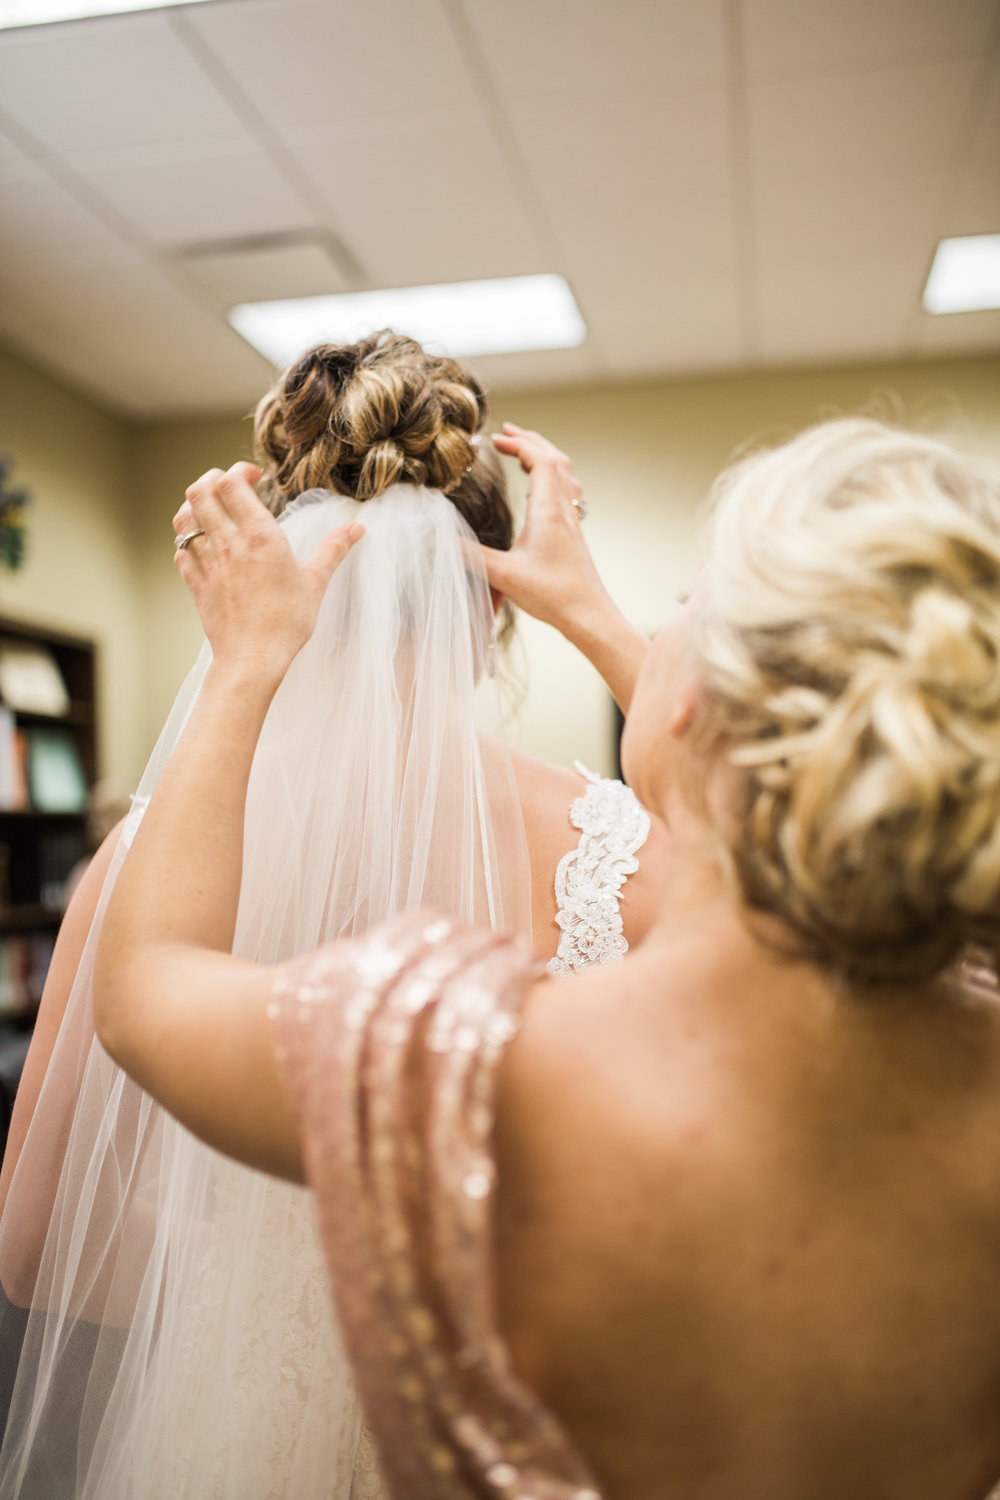 Pinning the Veil by the Maid of Honor